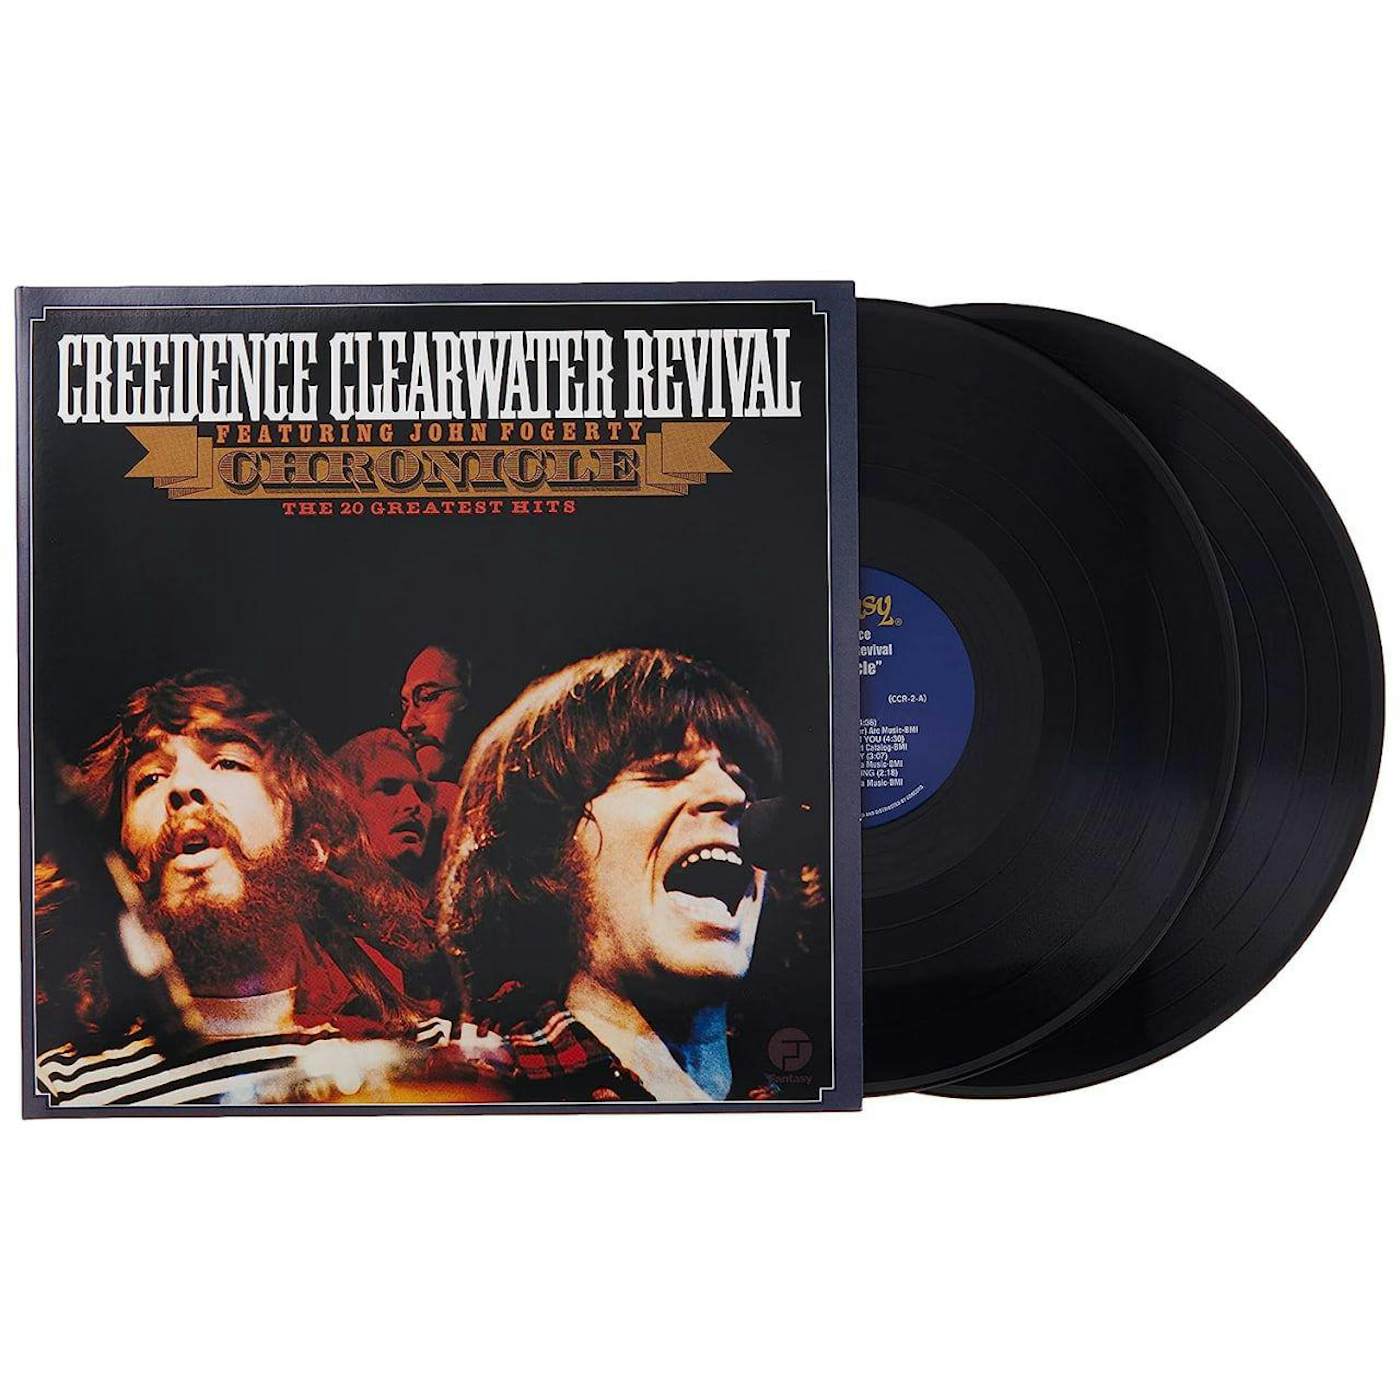 Creedence Clearwater Revival Chronicle: The 20 Greatest Hits (2LP/180 Gram) Vinyl Record